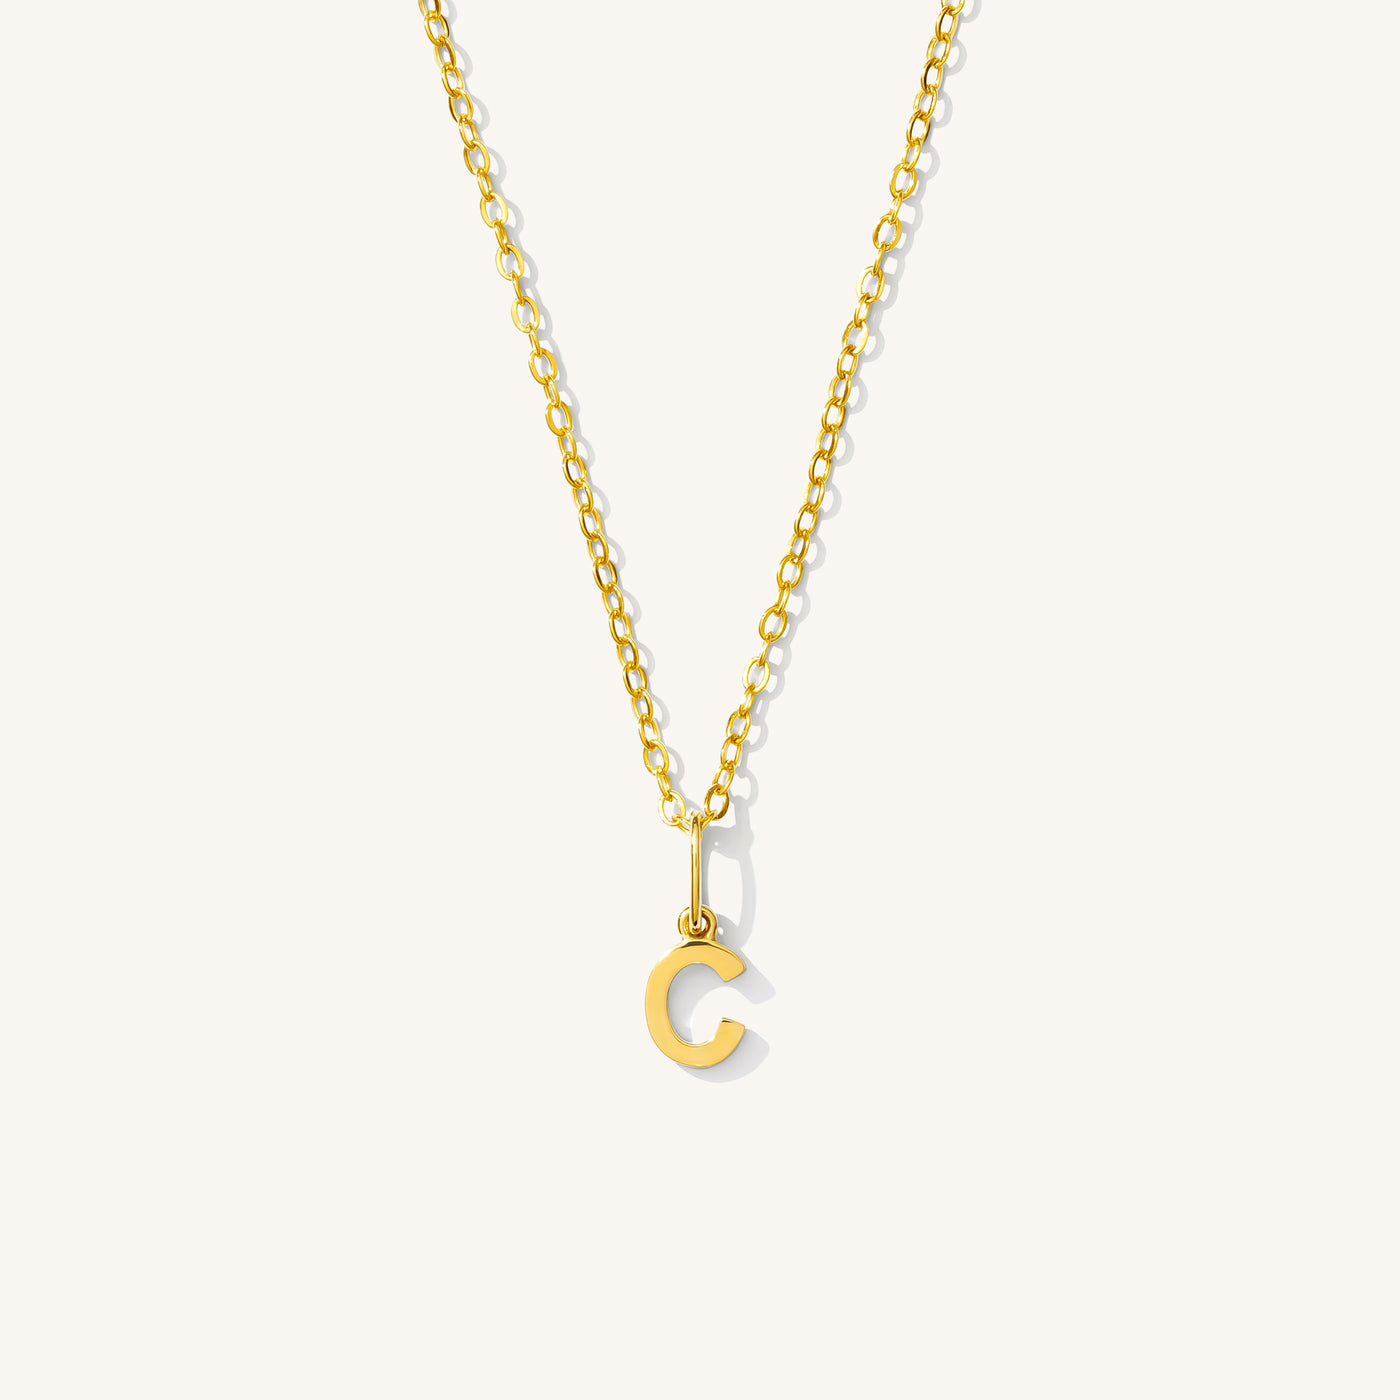 C Tiny Hanging Initial Necklace